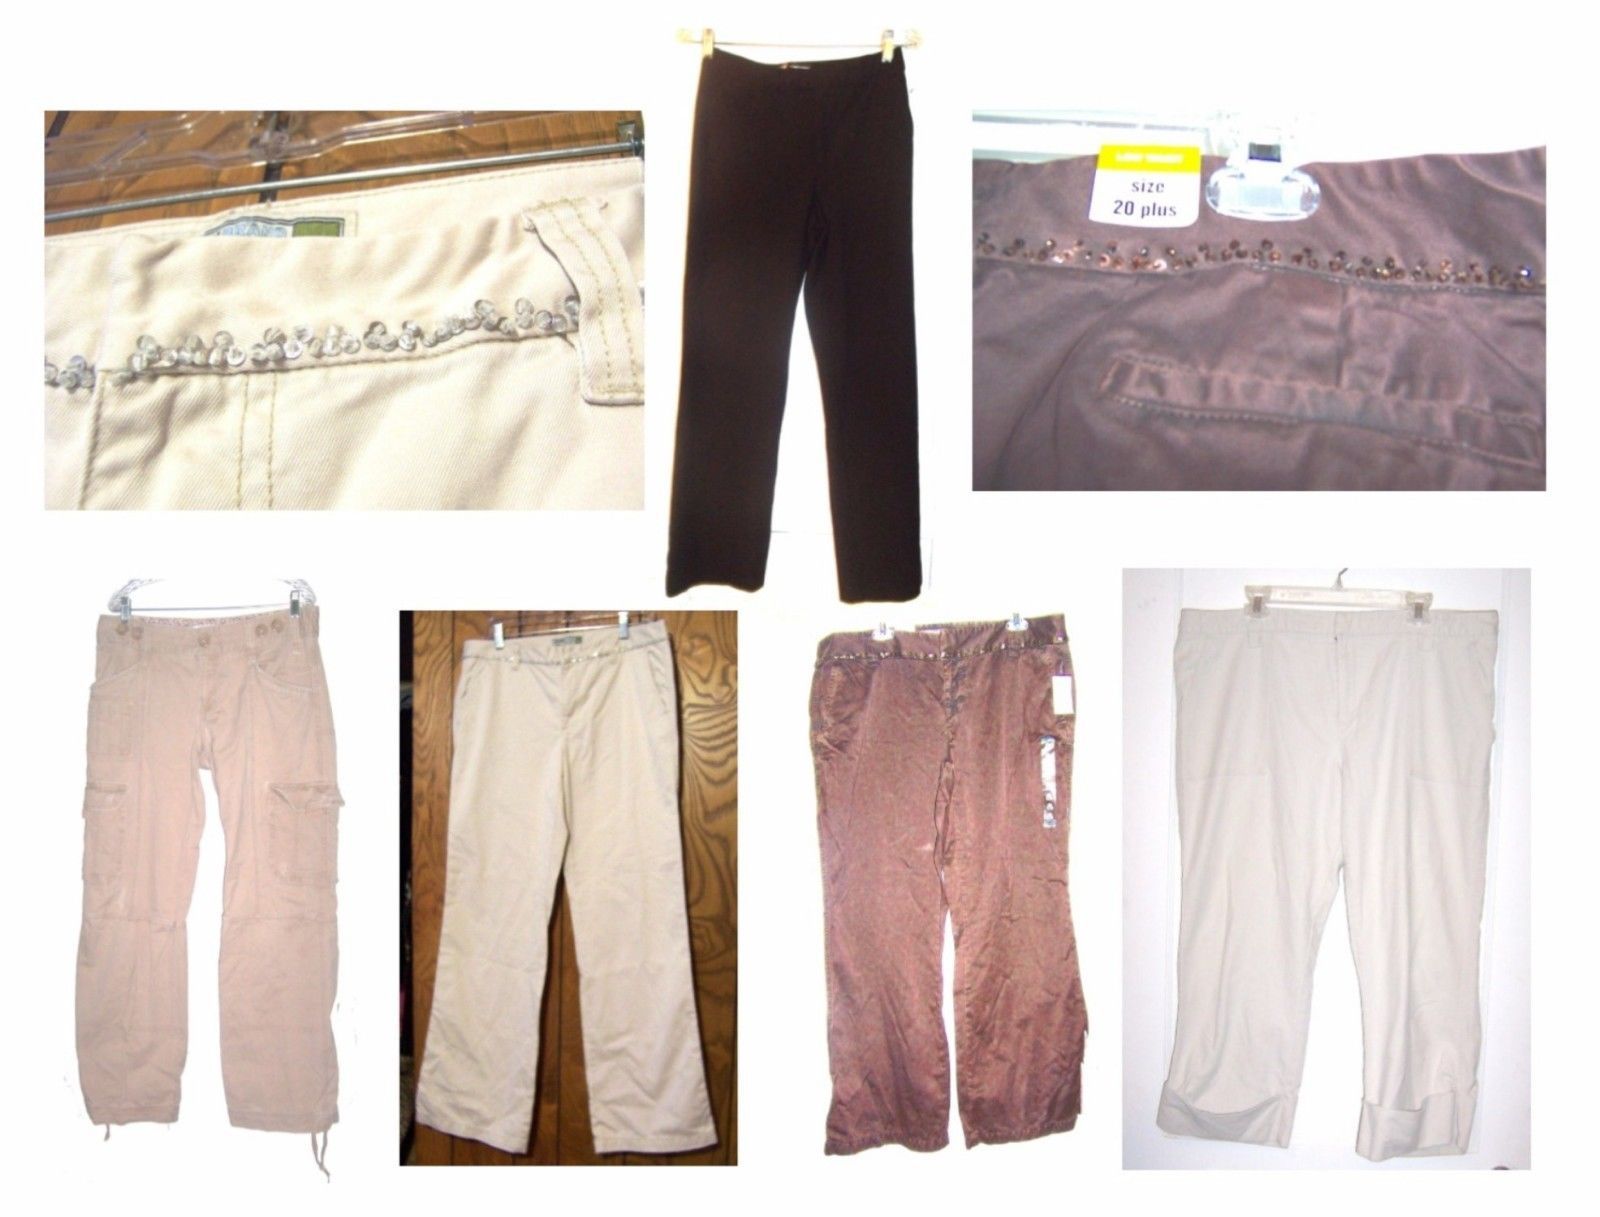 Primary image for Old Navy Denim Jeans and Capri Denim Jeans some embellished Sizes 4 to 20 